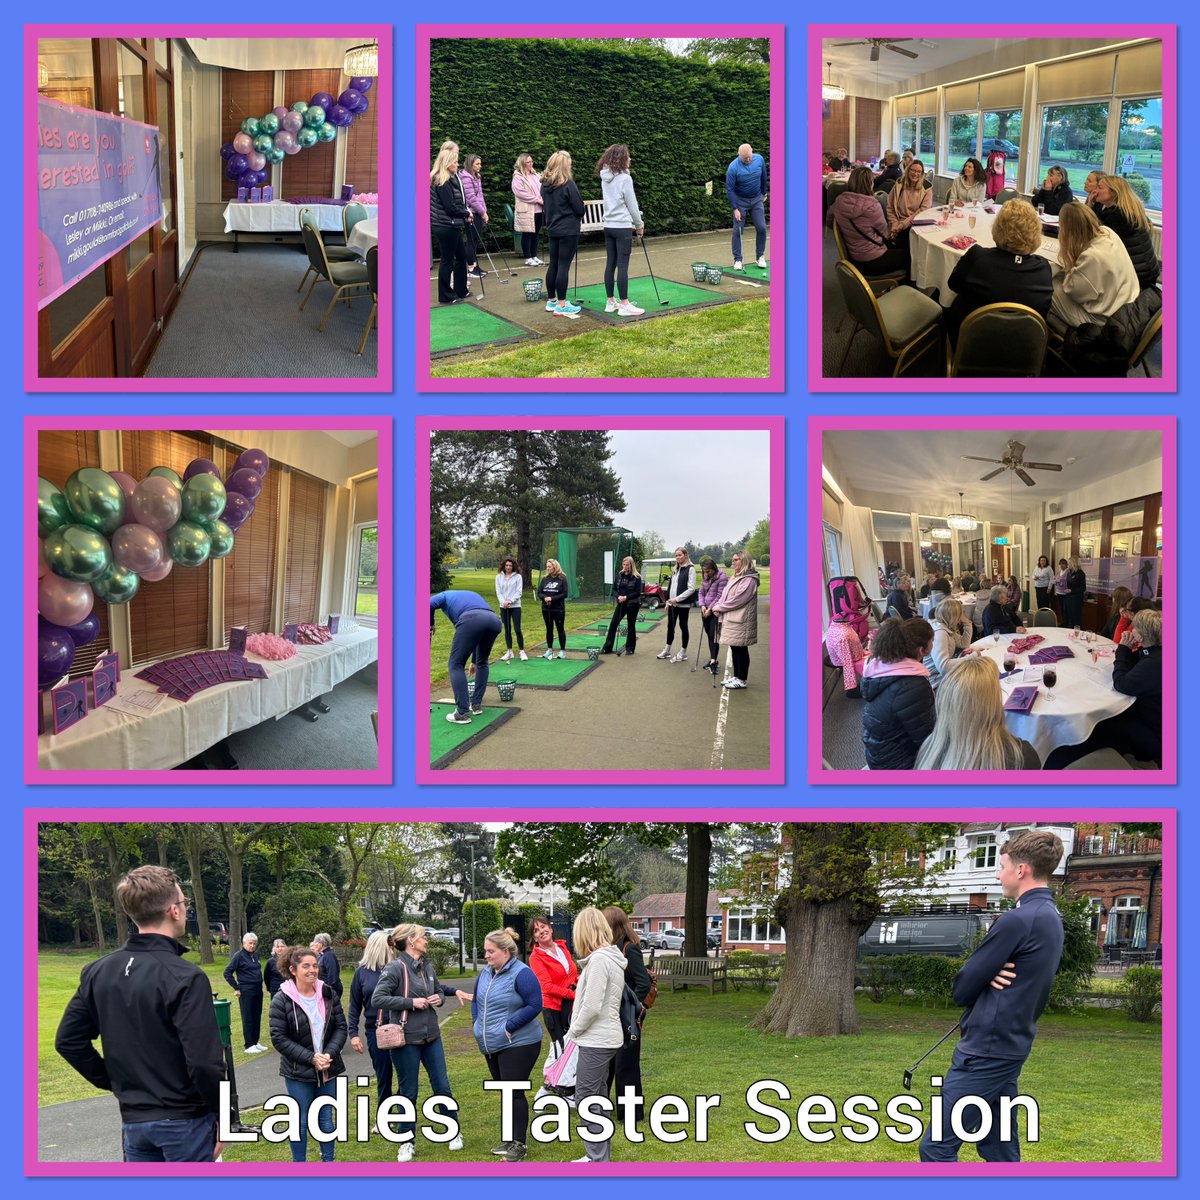 Thursday we held our ladies taster session. A great turn out of new ladies, we  look forward to seeing you all at our ladies academy #ladiesgolfatrgc #ladieswhogolf #ladygolfers